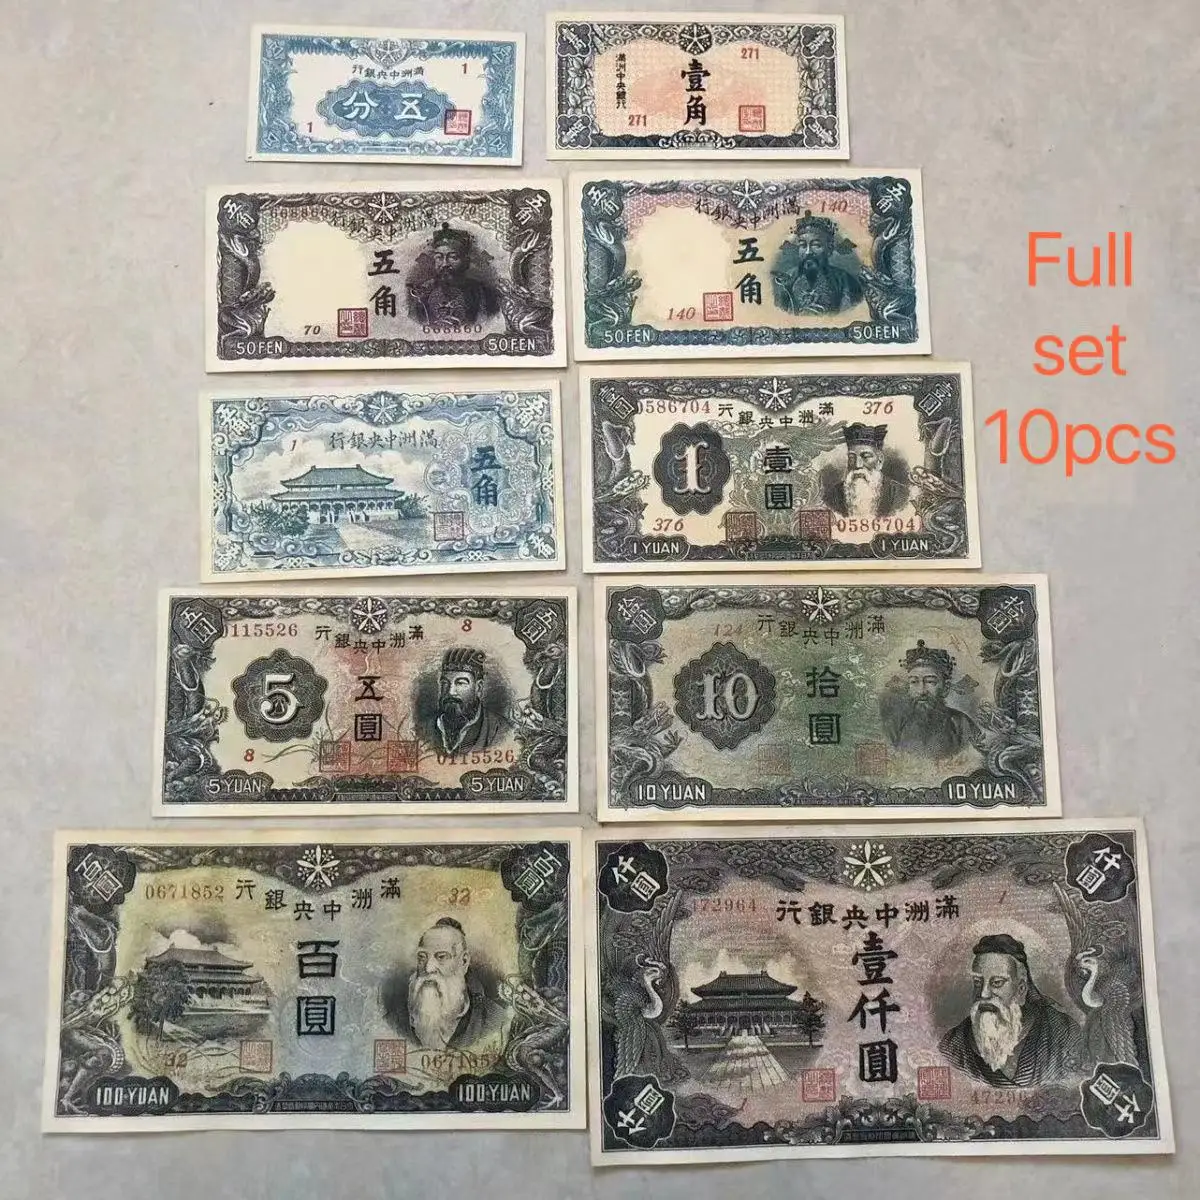 

Full Set 10pcs Typical Collectible Notes Minguo Period Three Eastern Provinces Paper Ticket Rare Rural Note Antiques Xmas Gifts